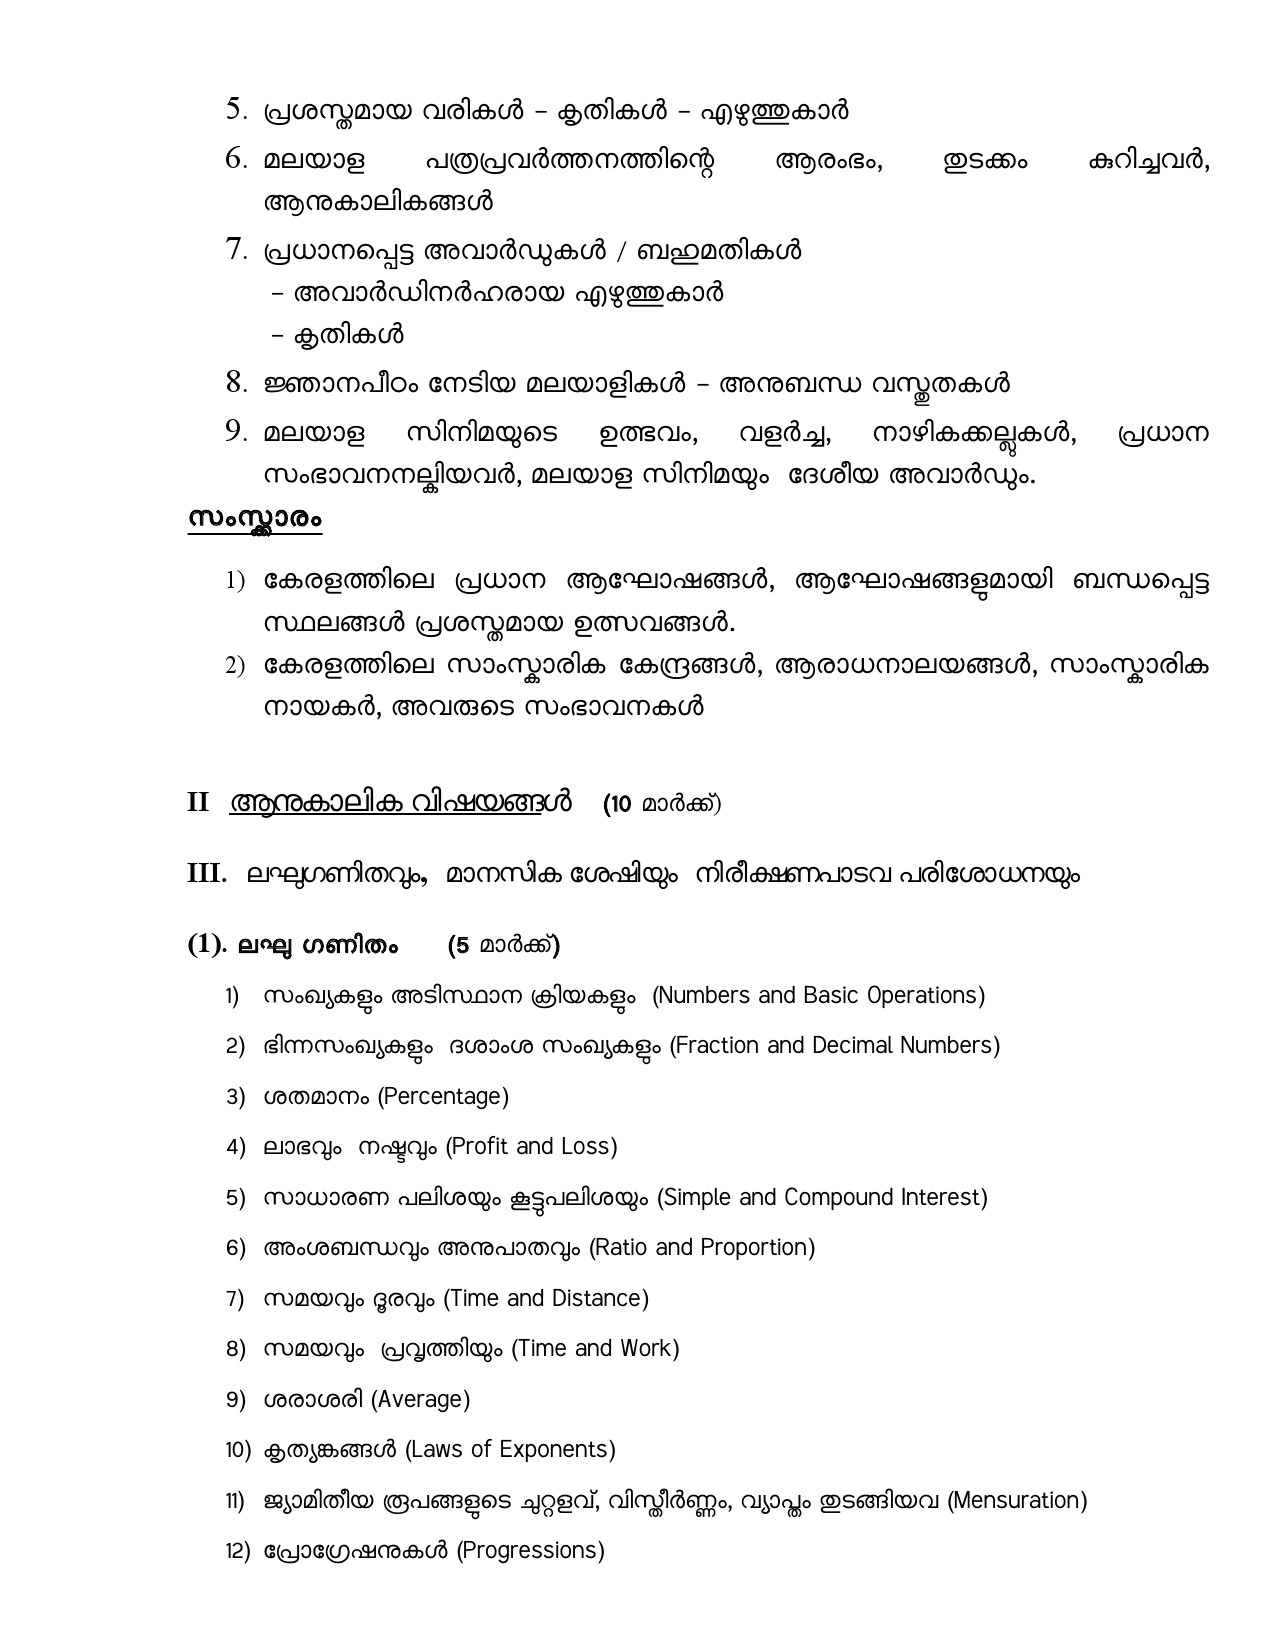 Beat Forest Officer Final Examination Syllabus For Plus Two Level - Notification Image 7